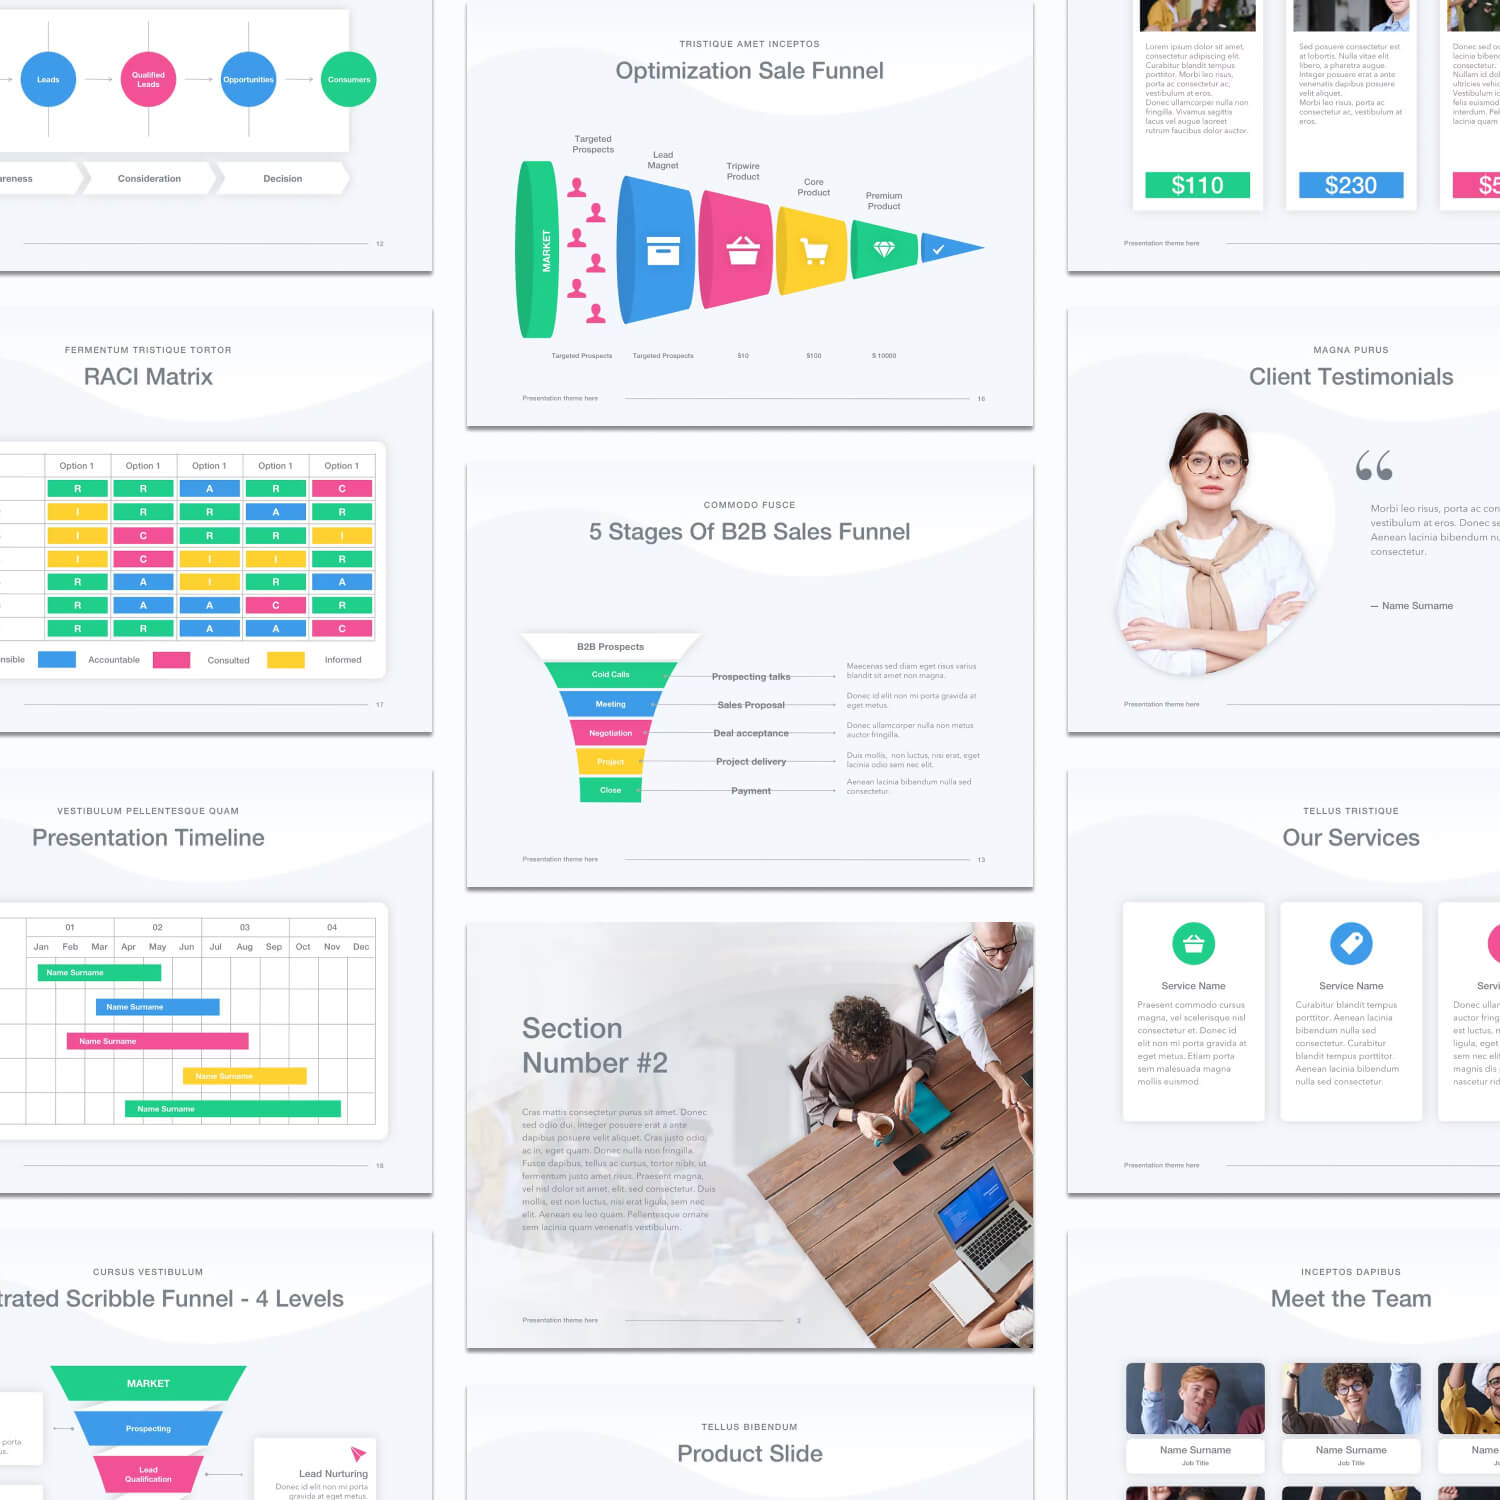 Optimization sale funnel of Sales Funnel PowerPoint Template.